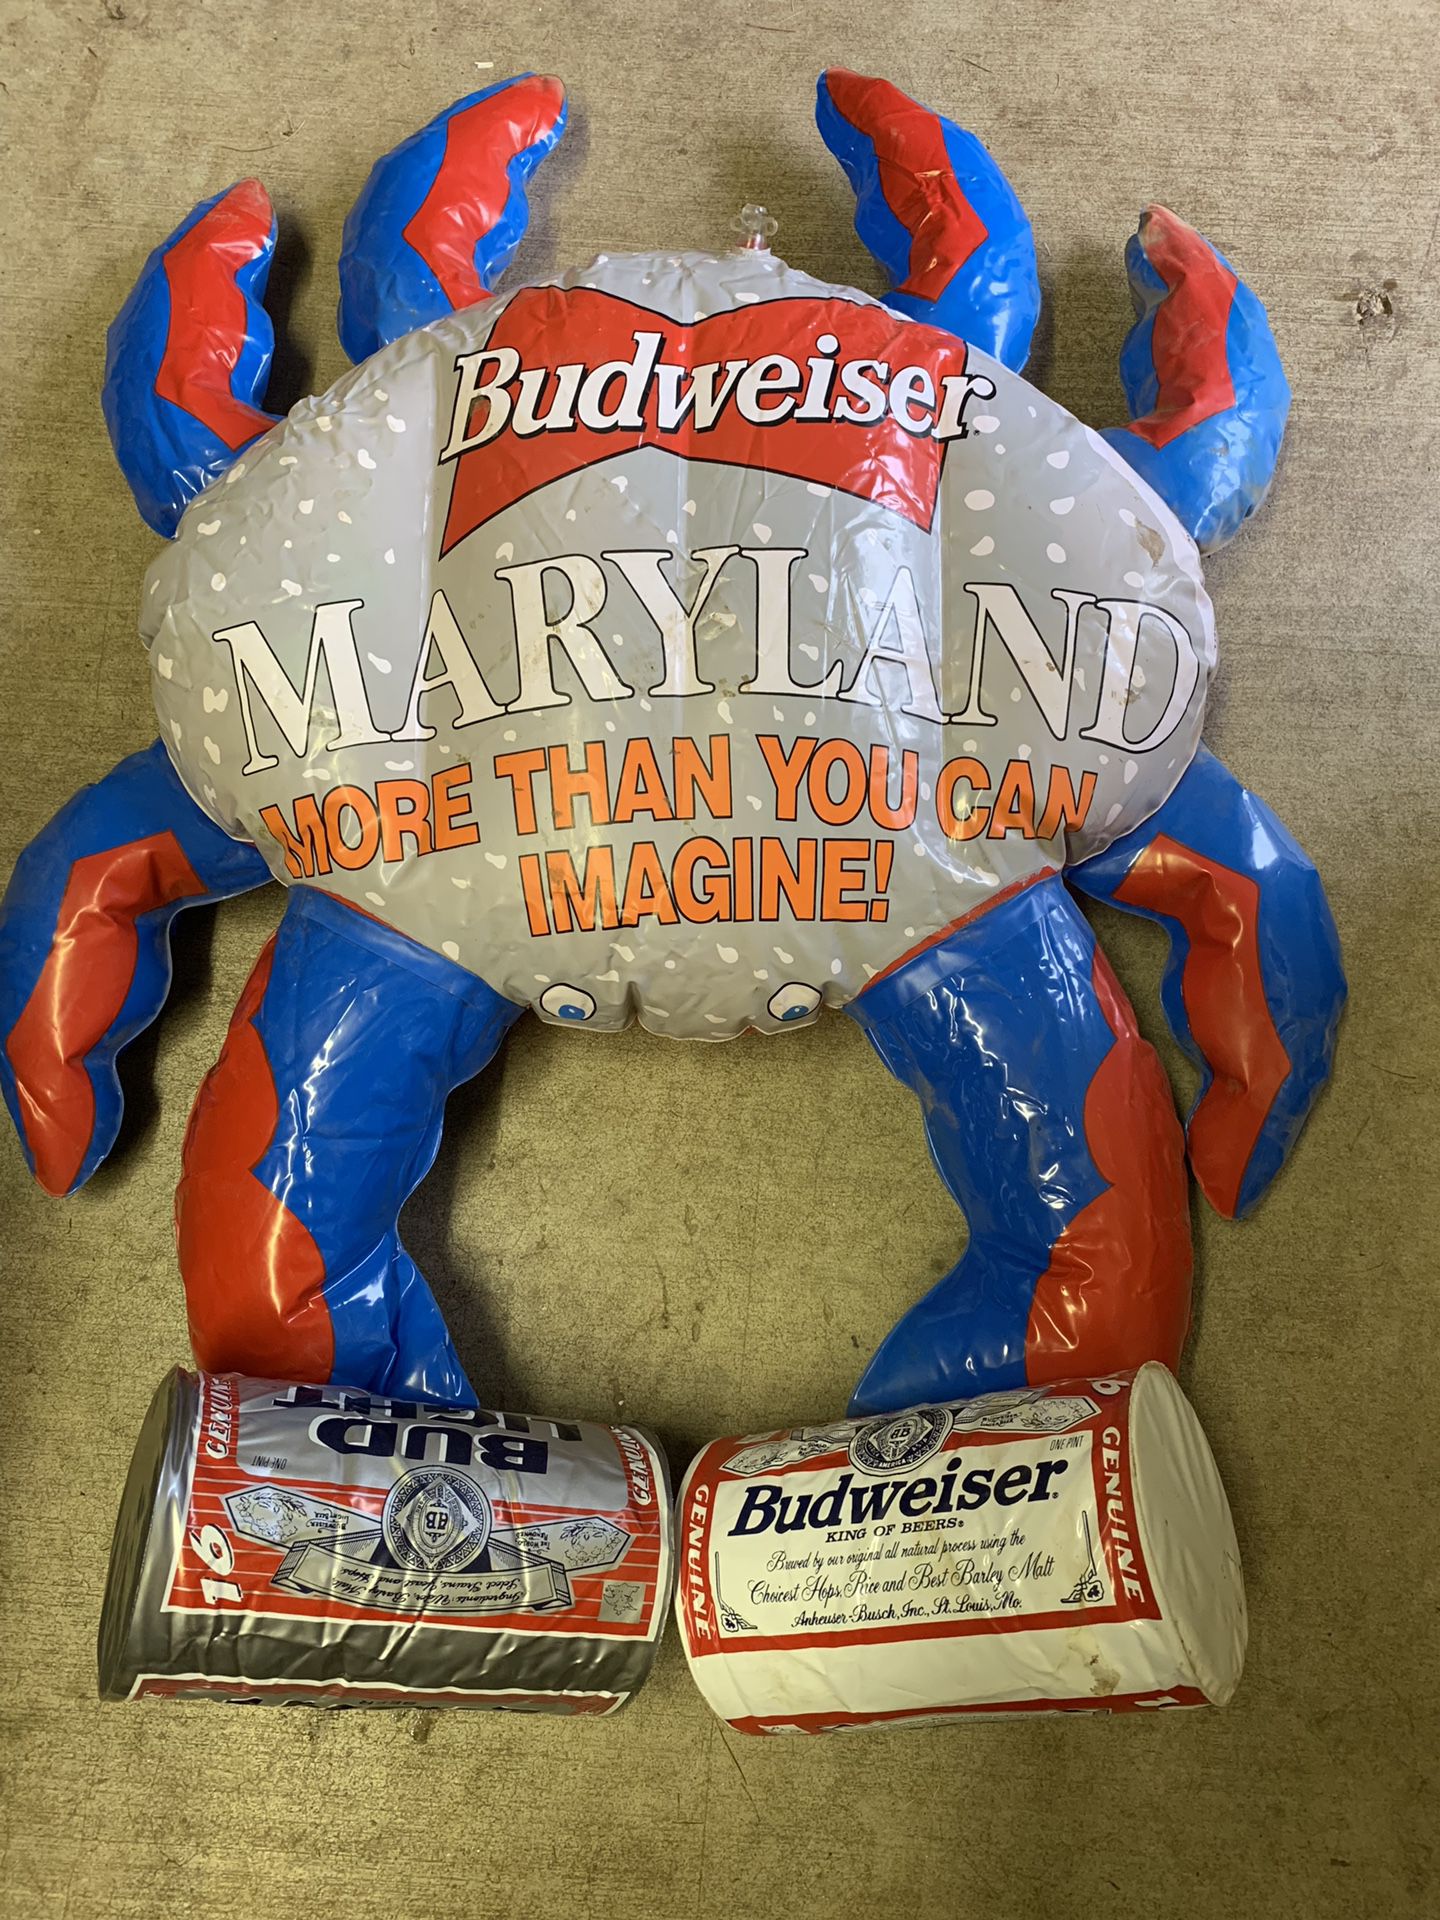 Maryland Blow up Budweiser Crab holding Bud and Bud Light Cans 34x27 inches